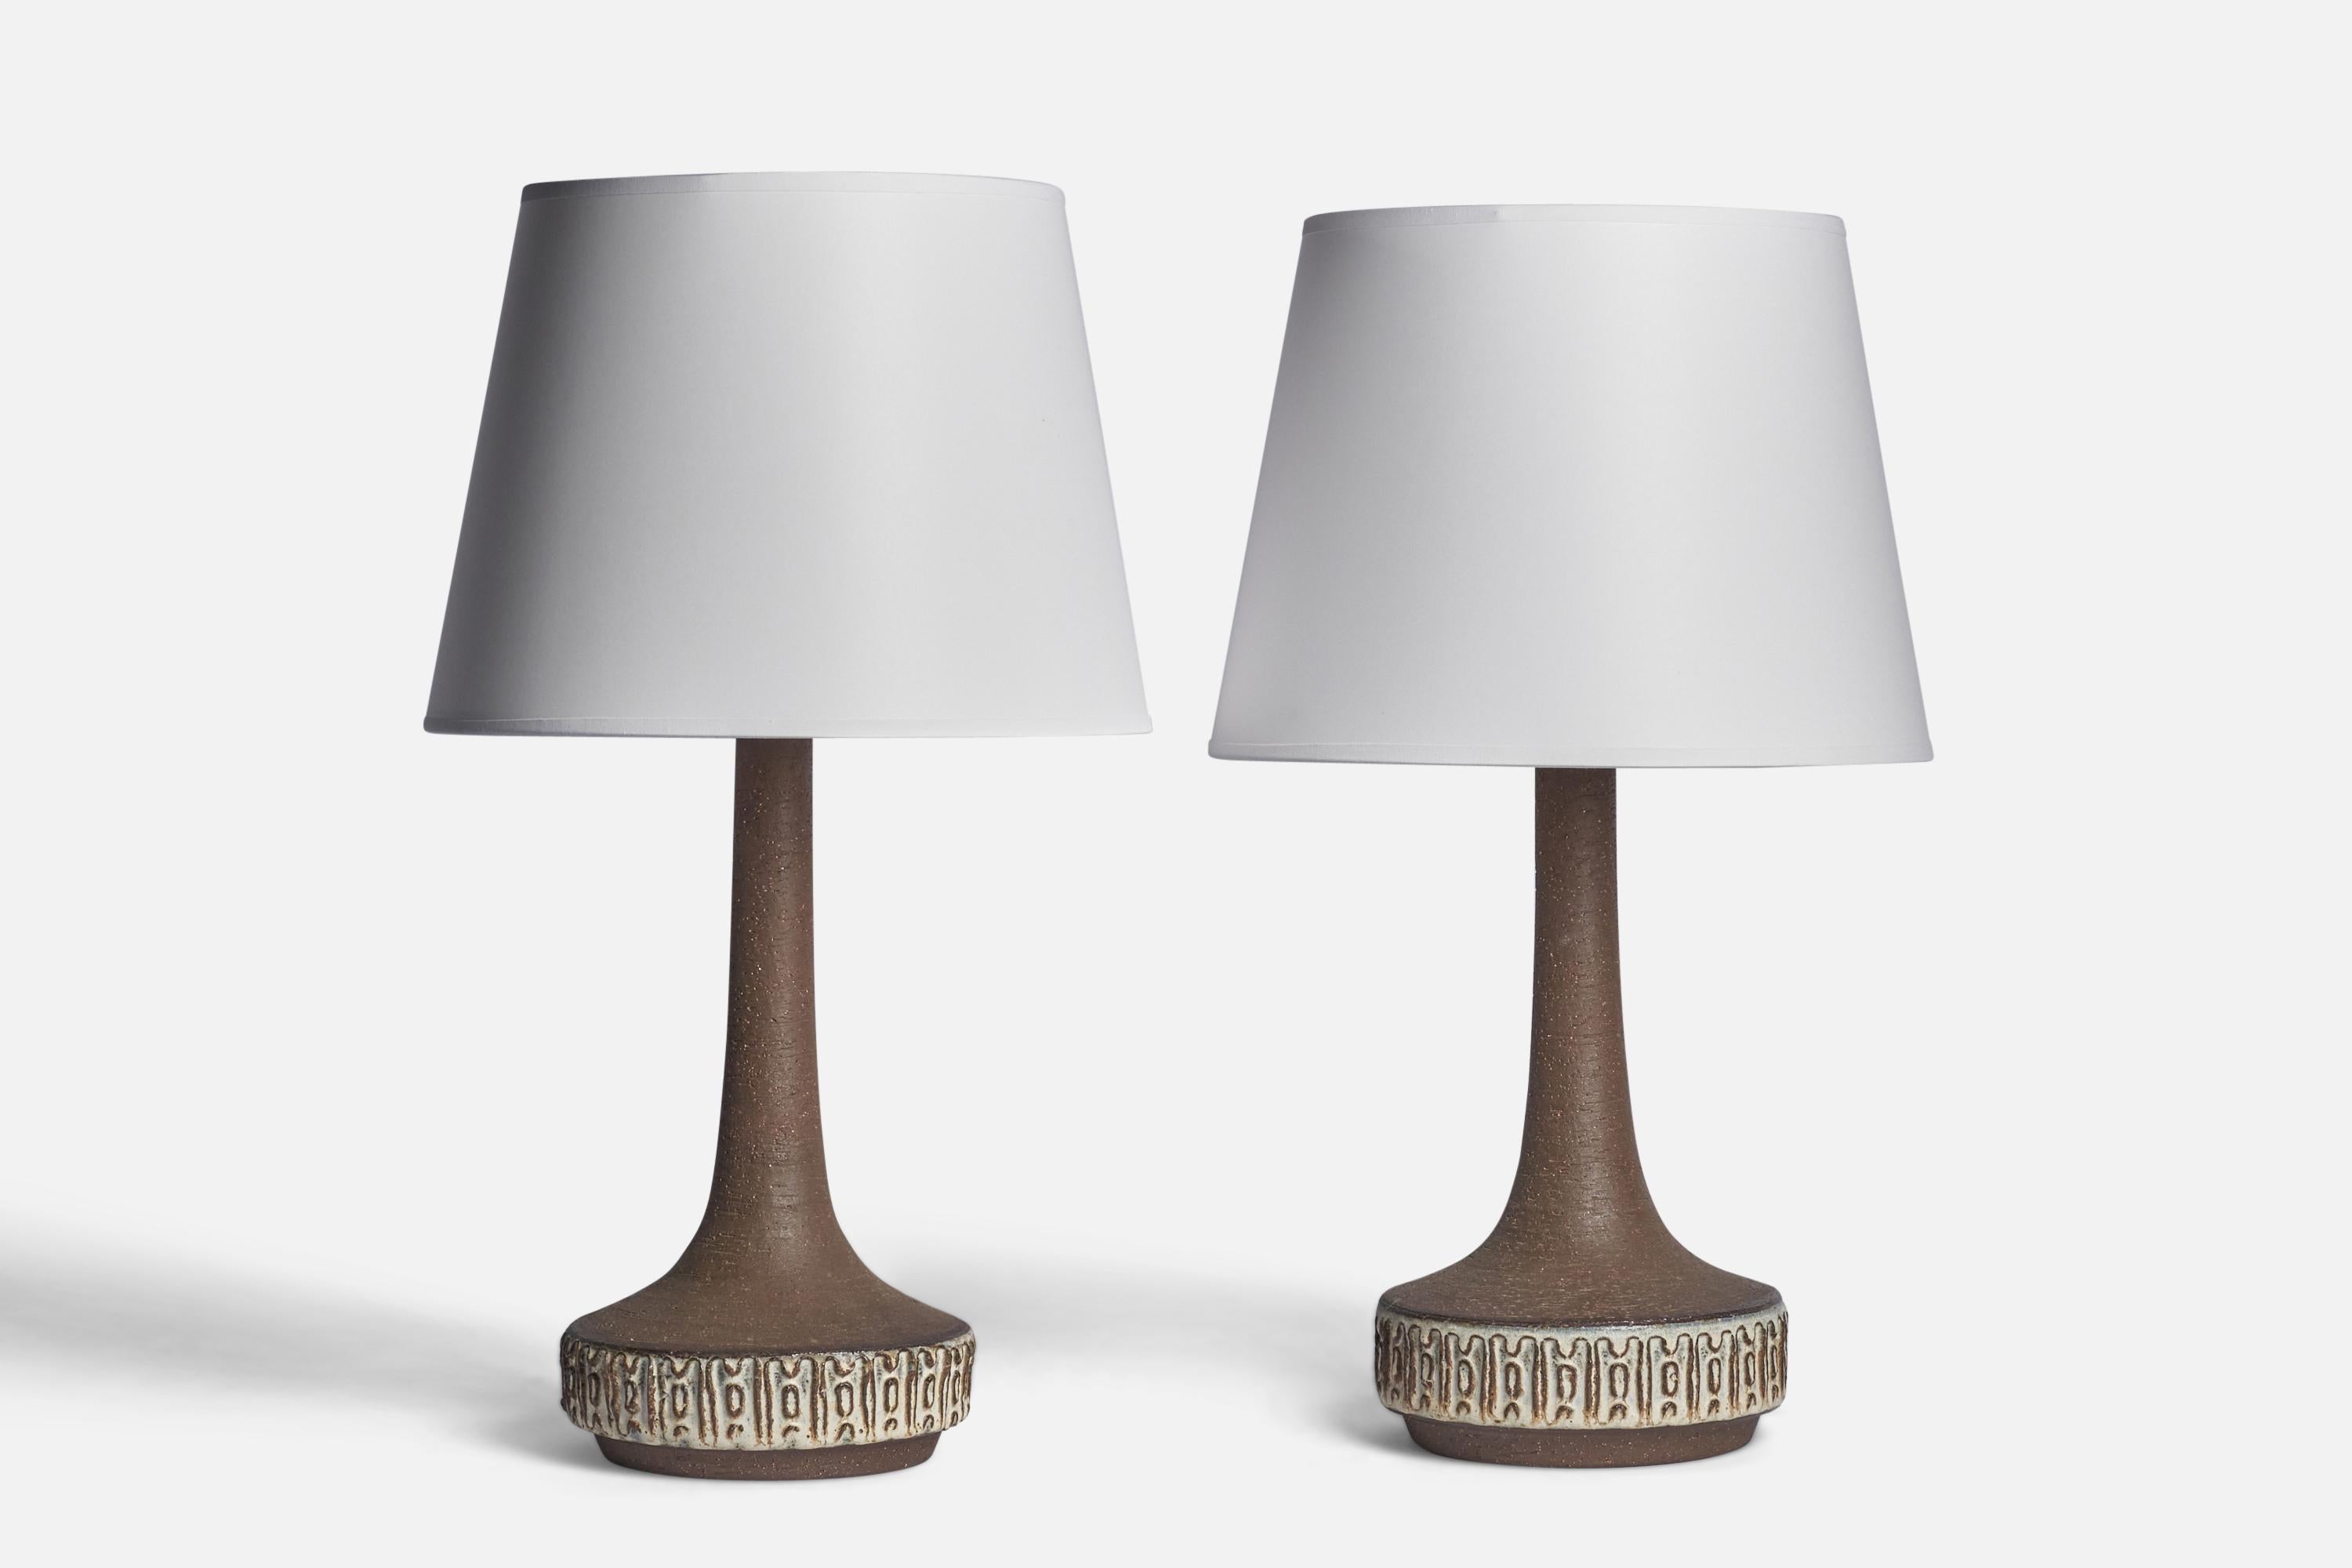 A pair of brown and light grey-glazed stoneware table lamps designed and produced by Michael Andersen, Bornholm, Denmark, 1960s.

Dimensions of Lamp (inches): 15.5” H x 7” Diameter
Dimensions of Shade (inches): 9” Top Diameter x 12” Bottom Diameter